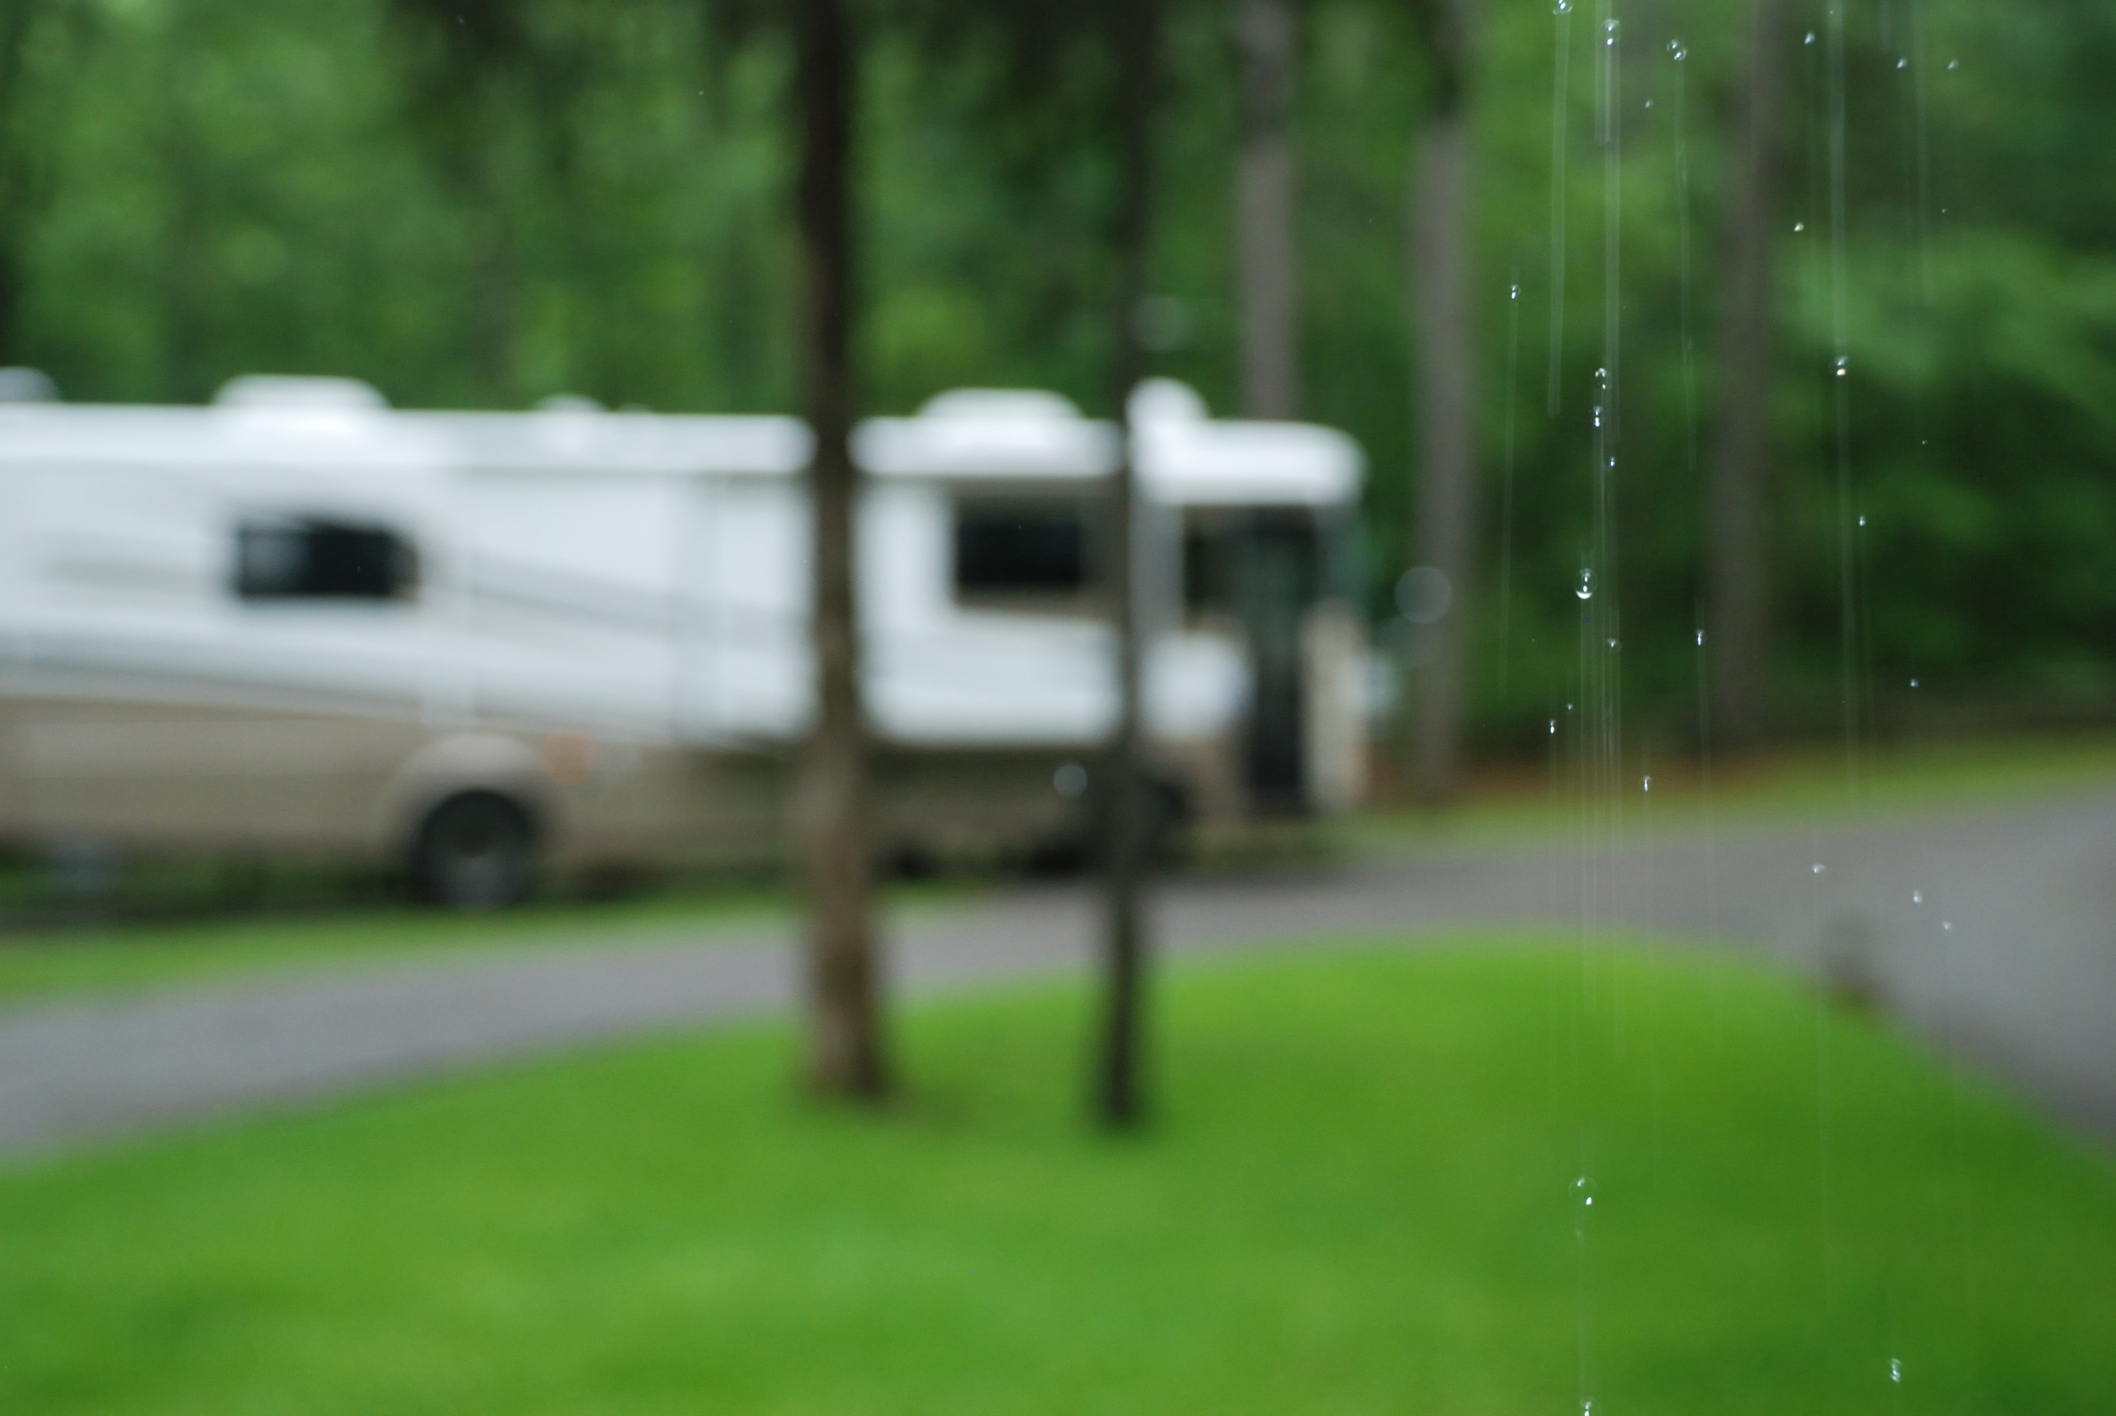 An RV in poor-visibility conditions caused by rain.